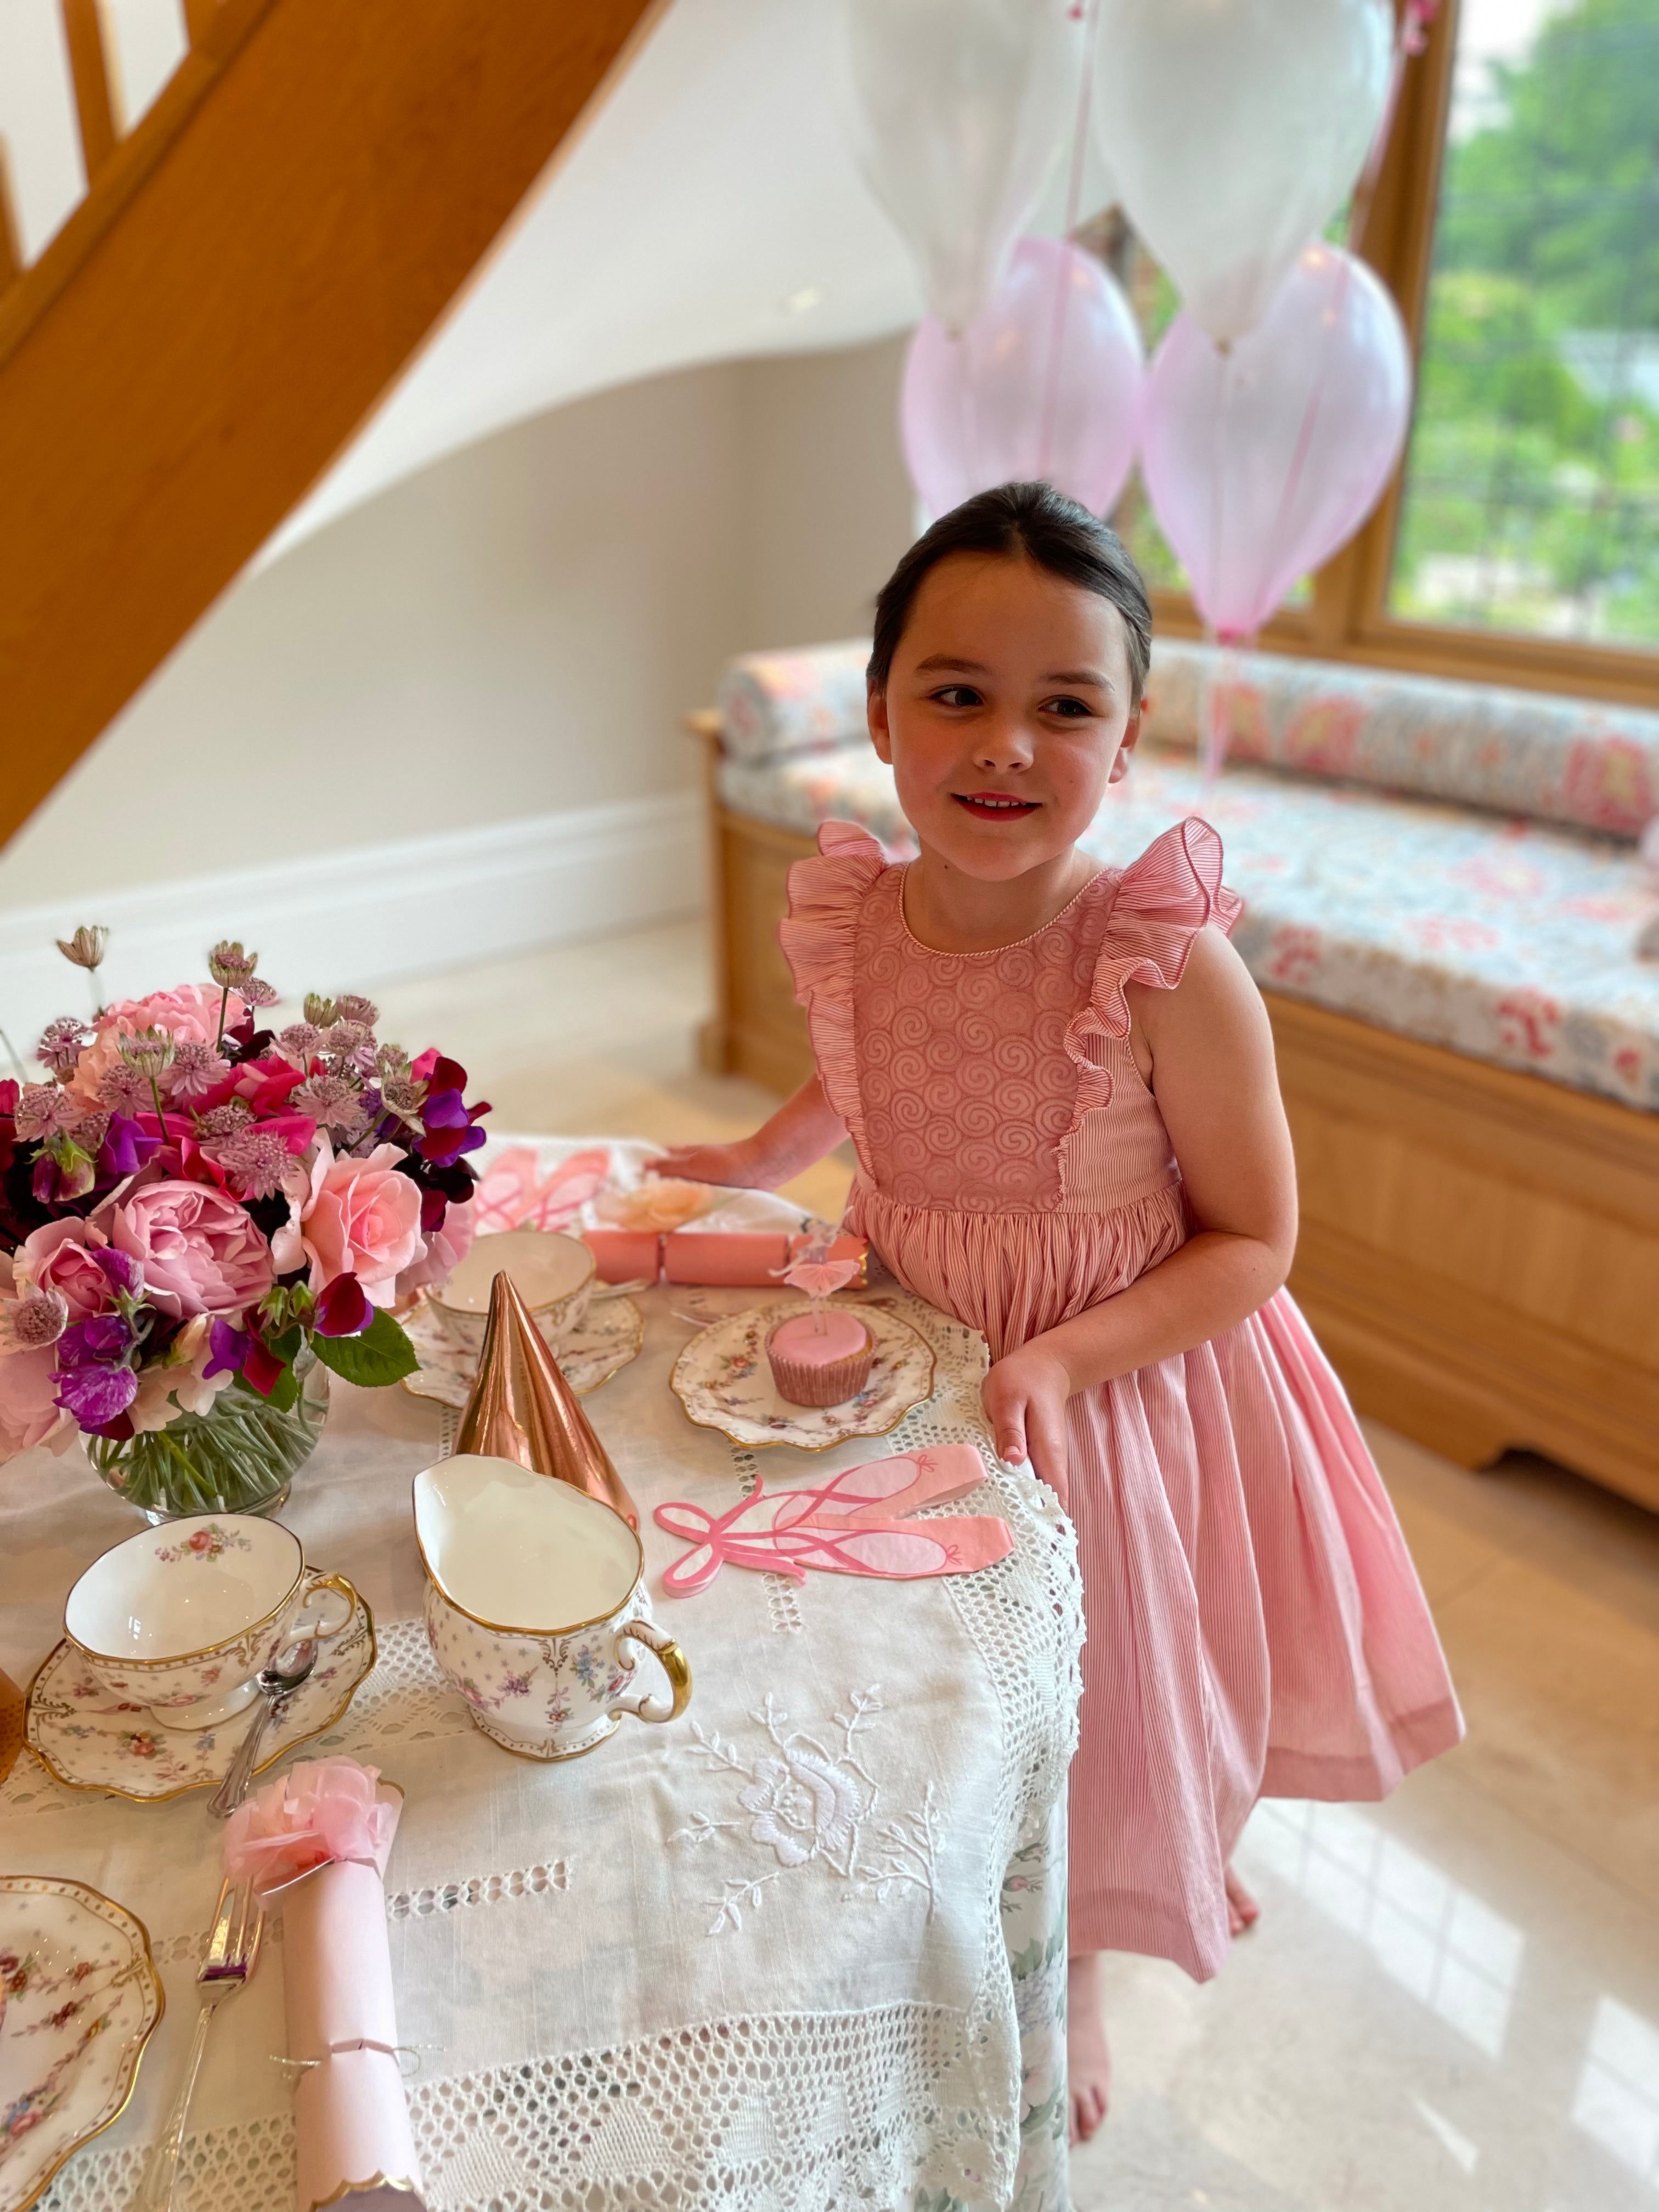 Party planning for children ballerina ballet pink birthday tea party inspiration ideas Charlotte sy Dimby